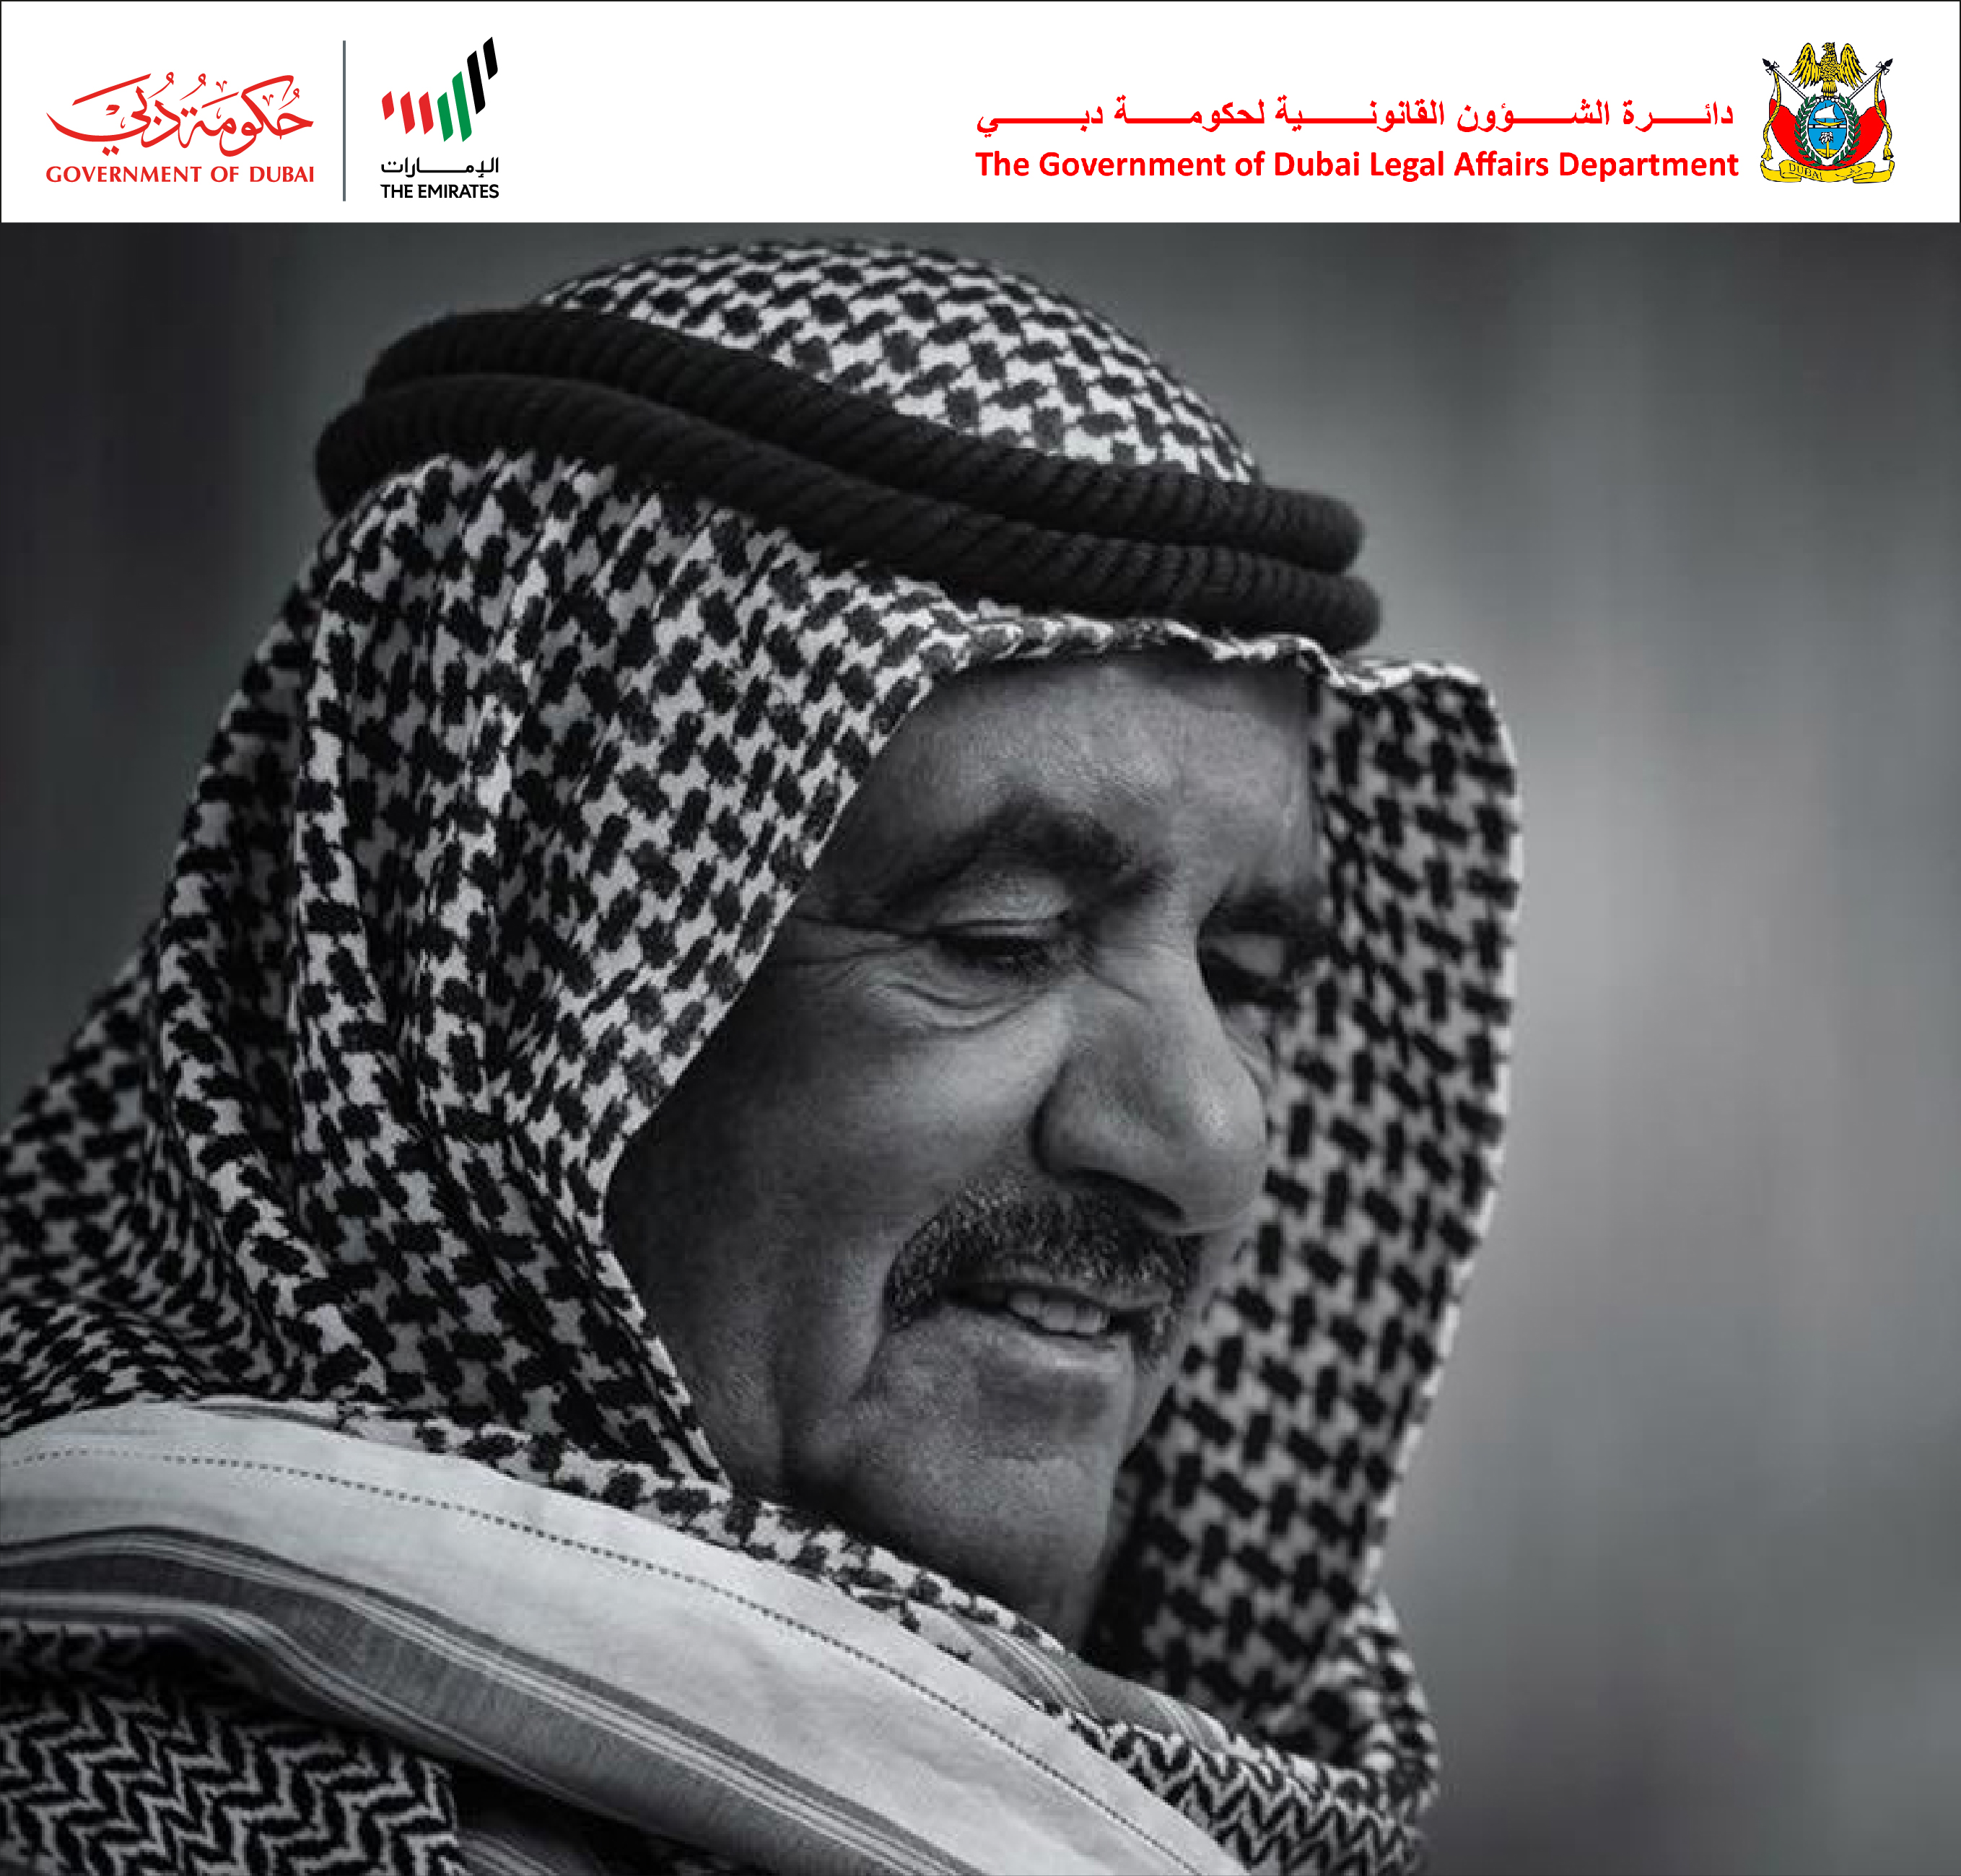 Statement by His Excellency the Director General of the Government of Dubai Legal Affairs Department on the sad loss of Sheikh Hamdan bin Rashid Al Maktoum